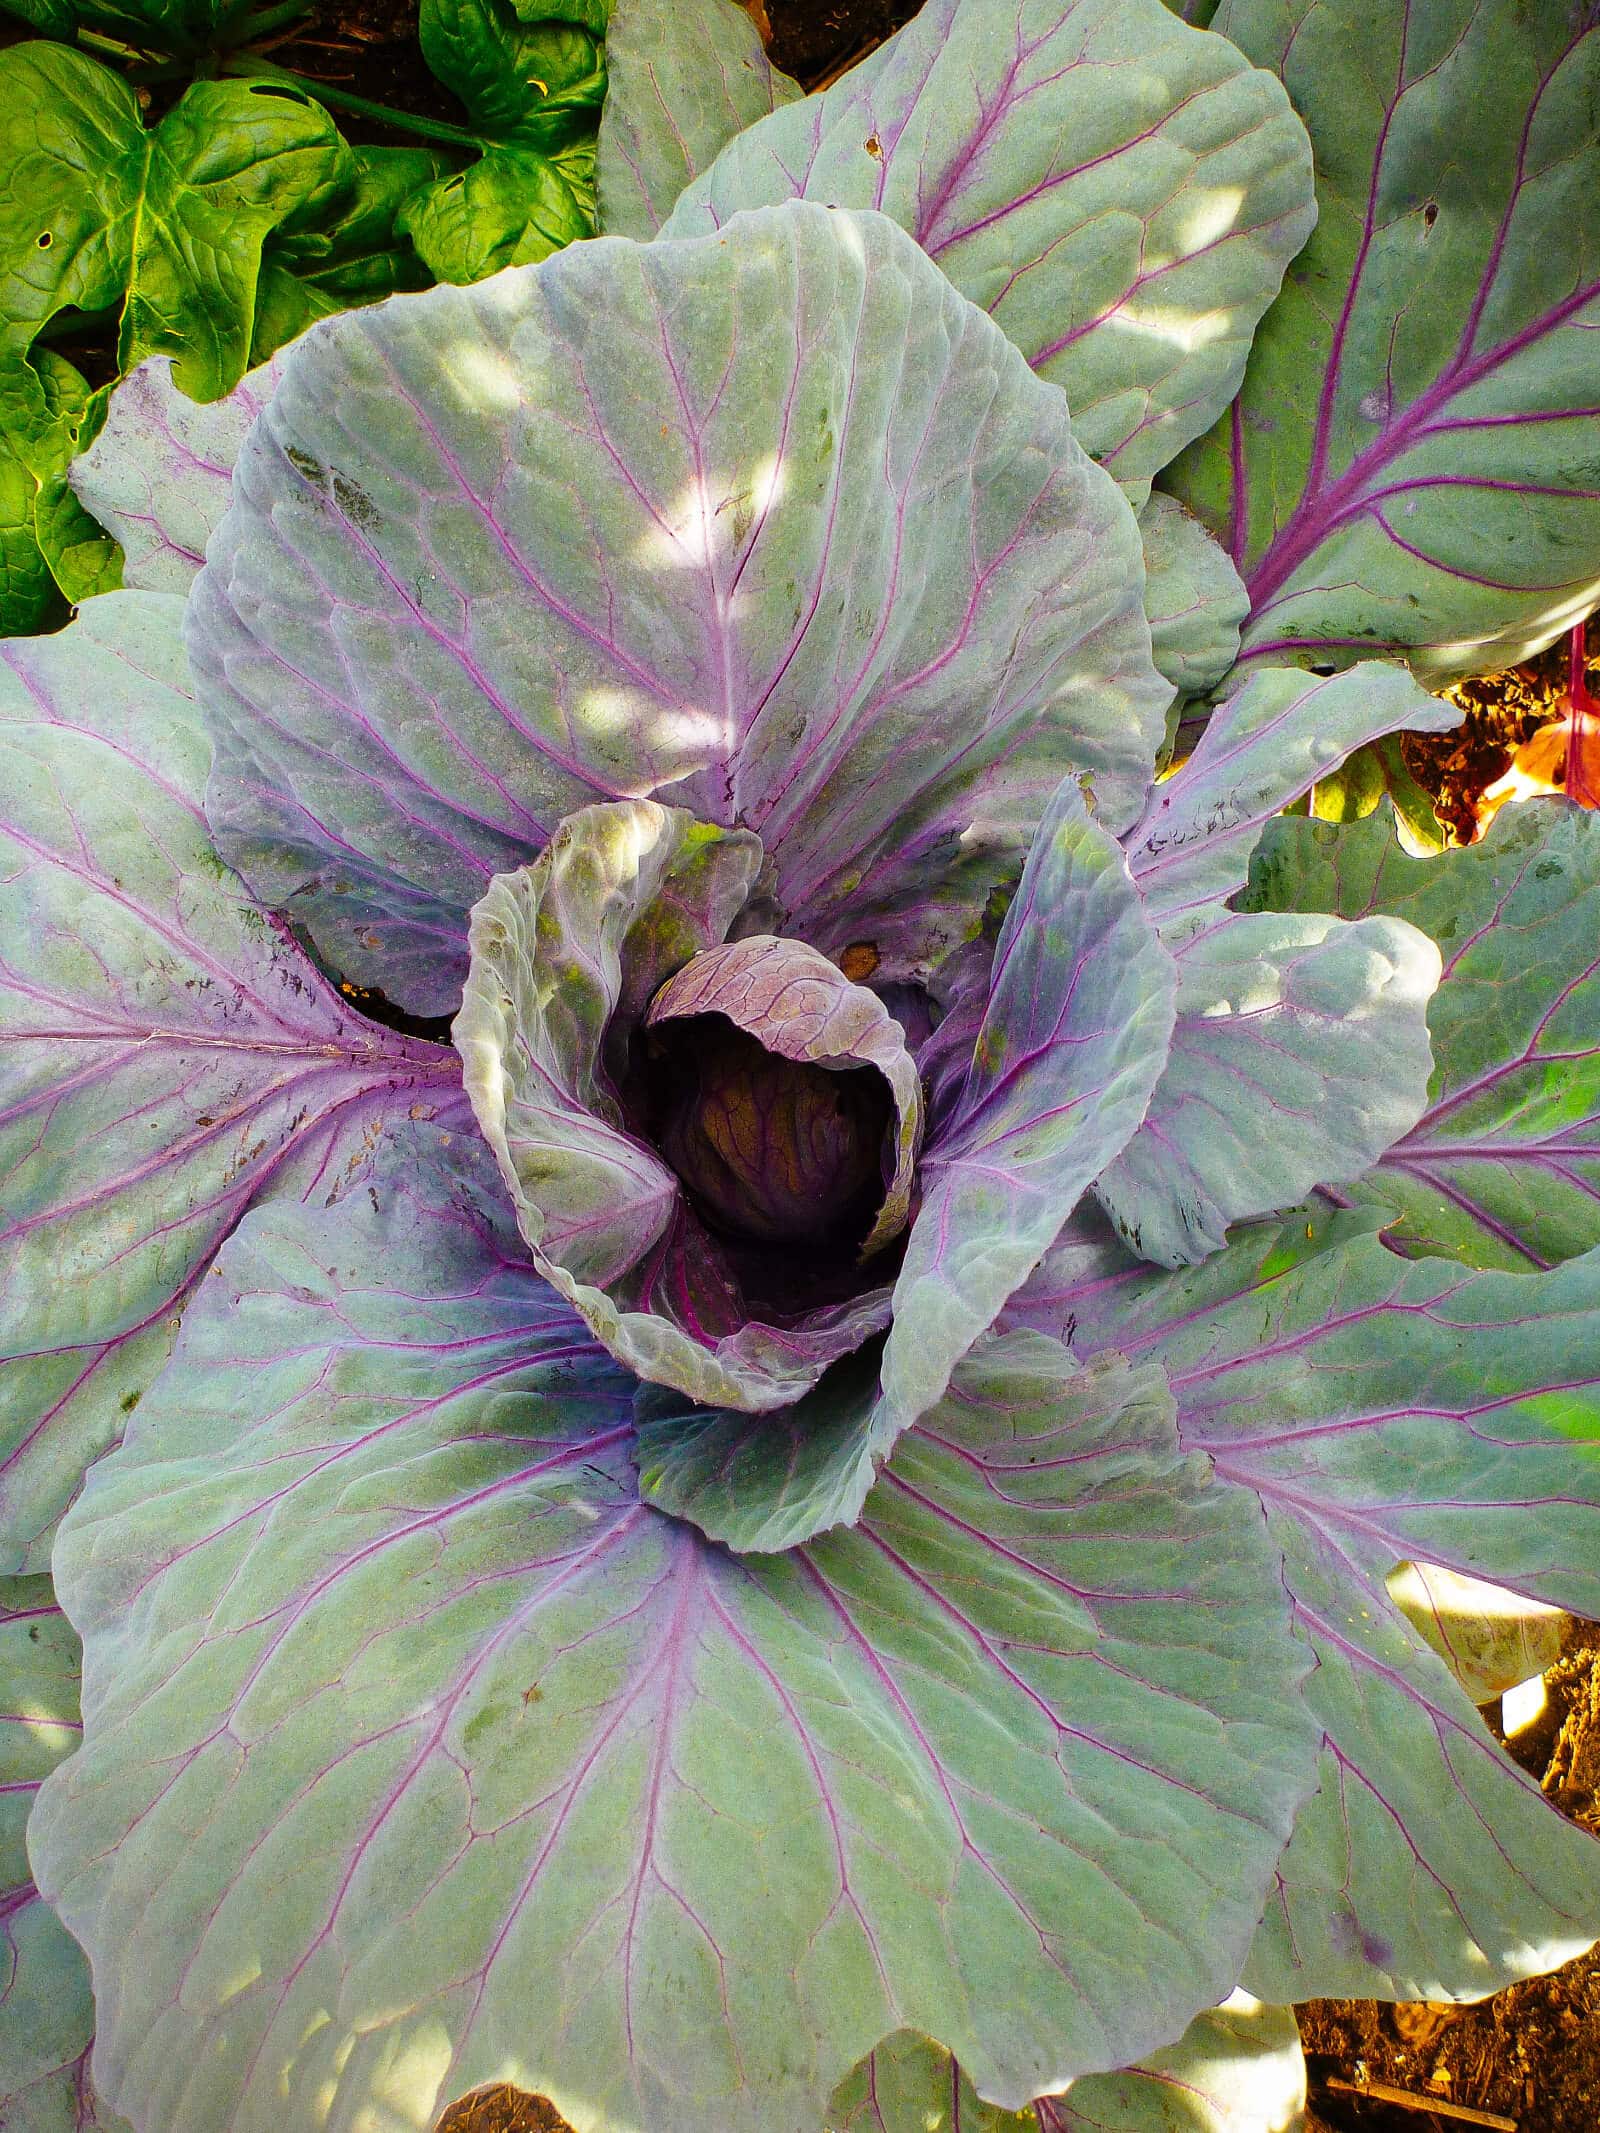 You can eat the broad outer leaves of cabbage